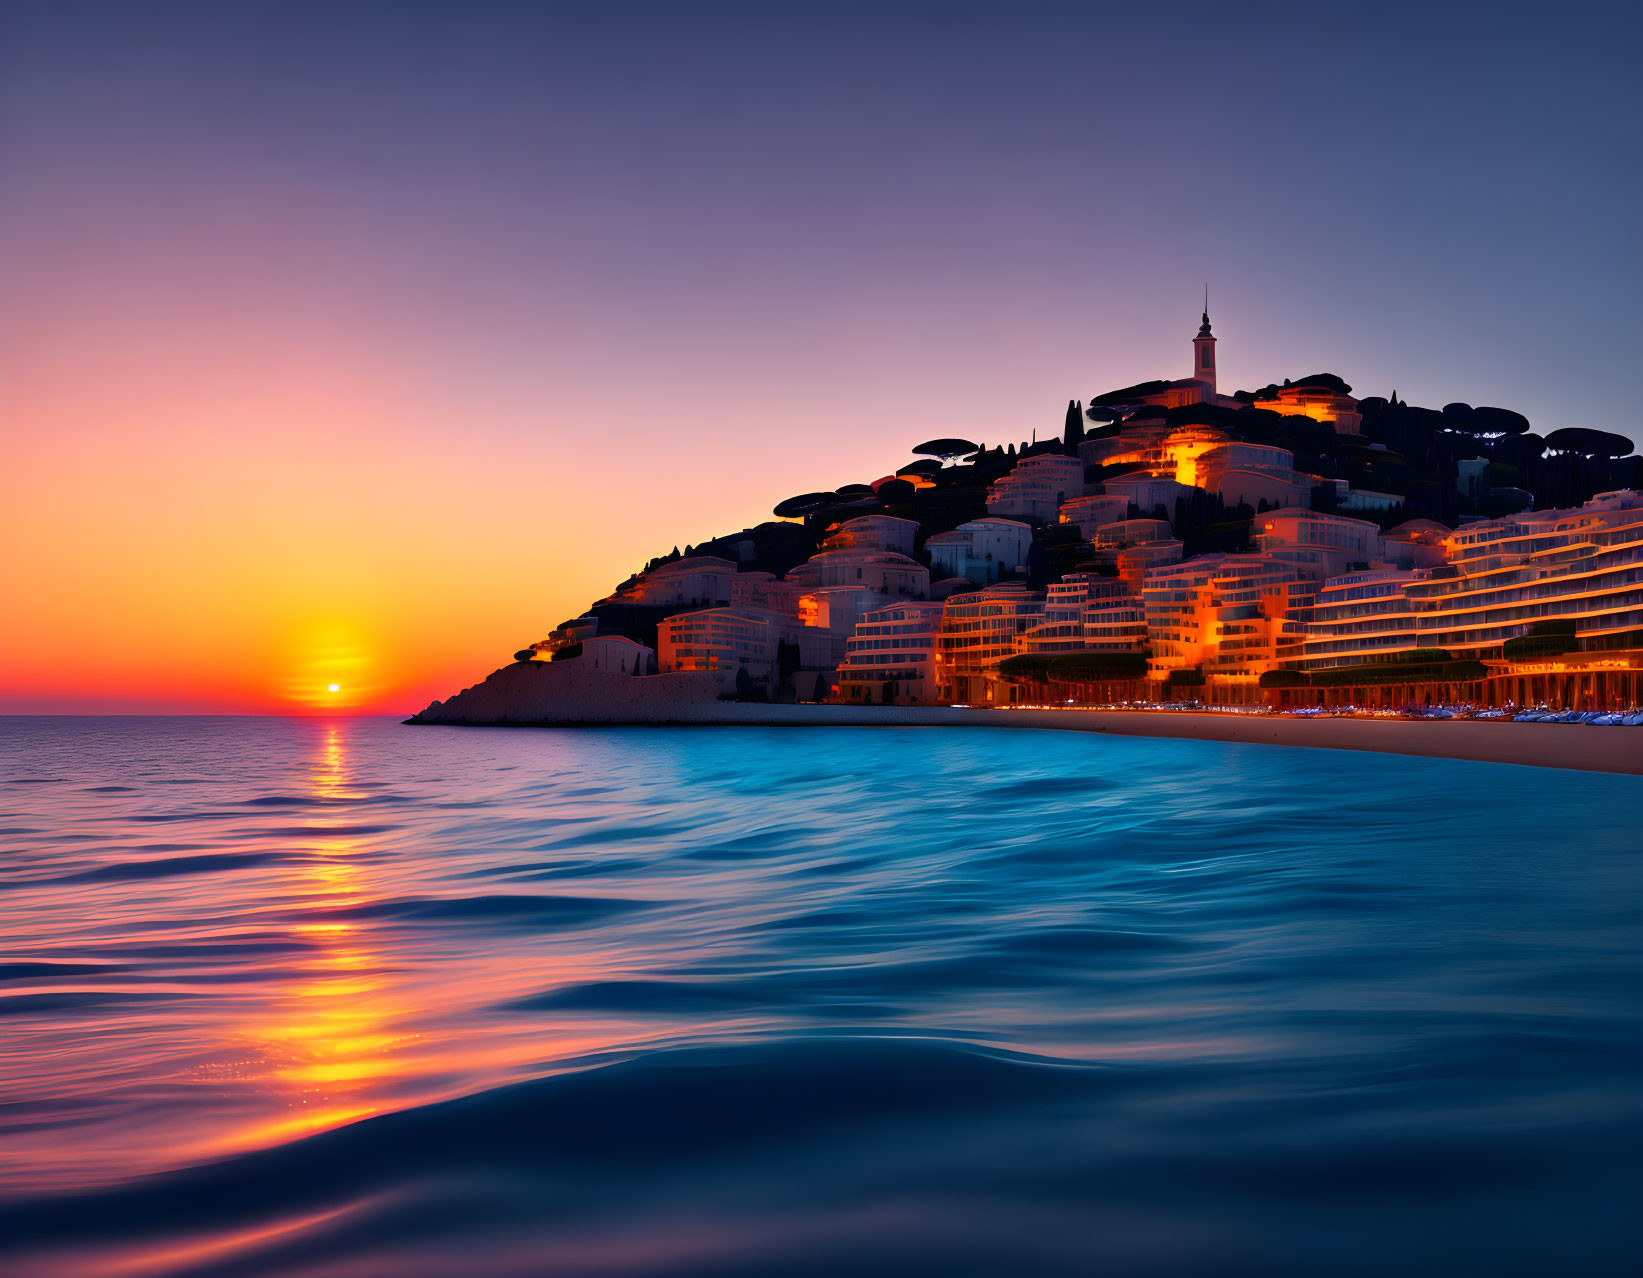 "Dazzling Dusk: The French Riviera's Evening Charm